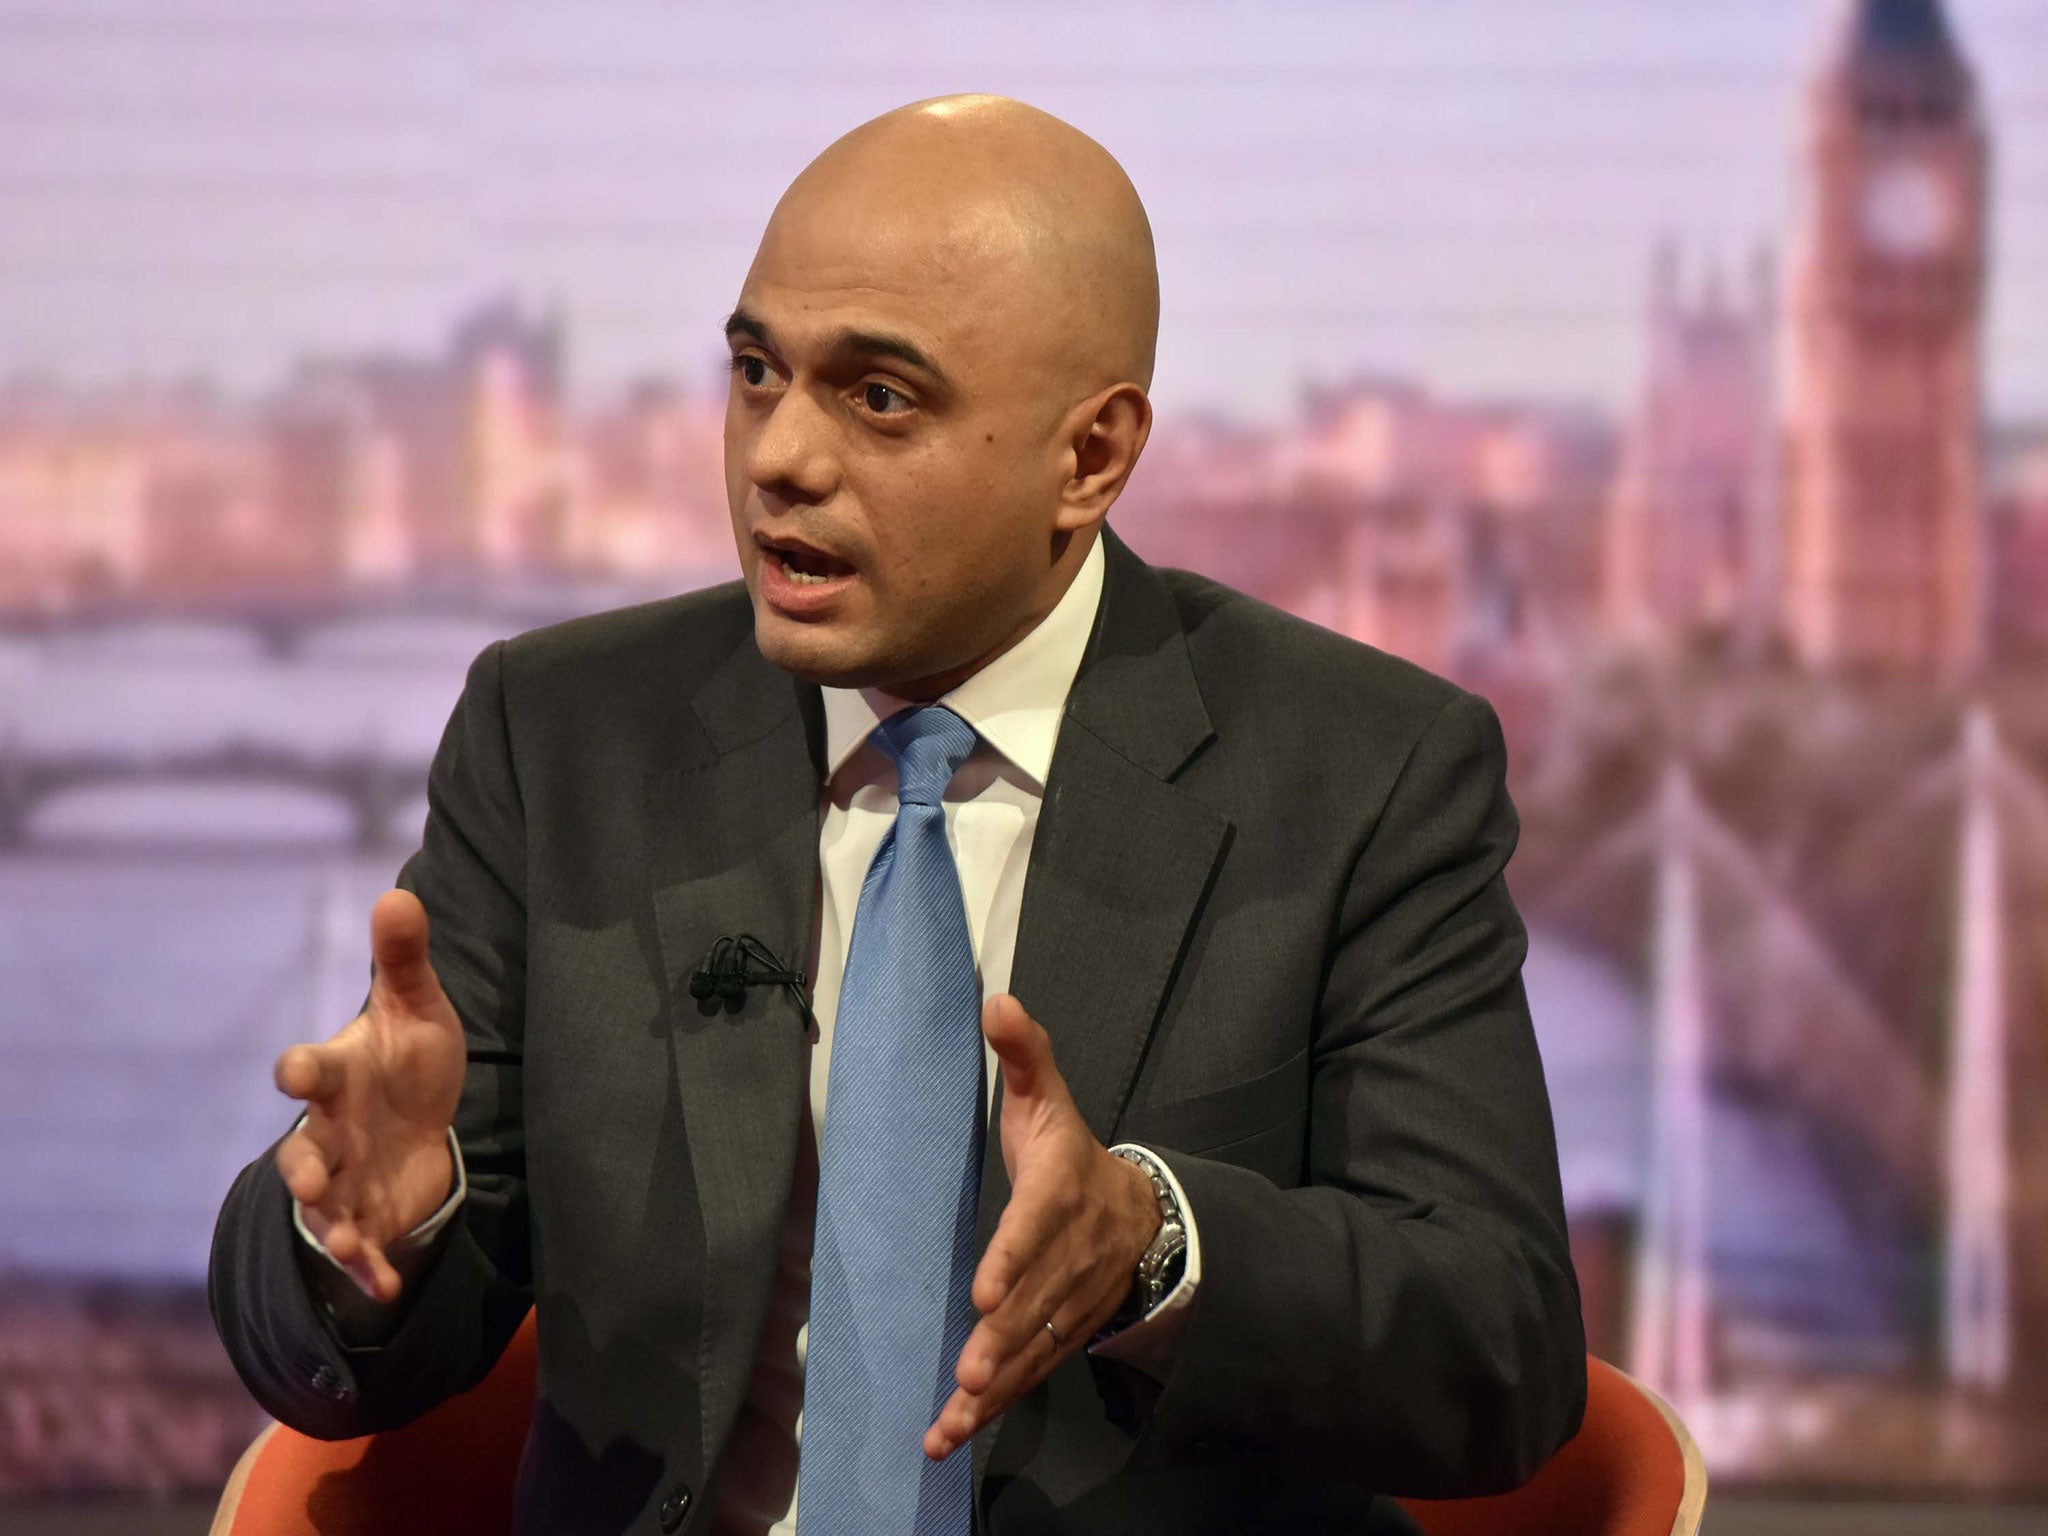 Business Secretary Sajid Javid appearing on the BBC One current affairs programme, The Andrew Marr Show